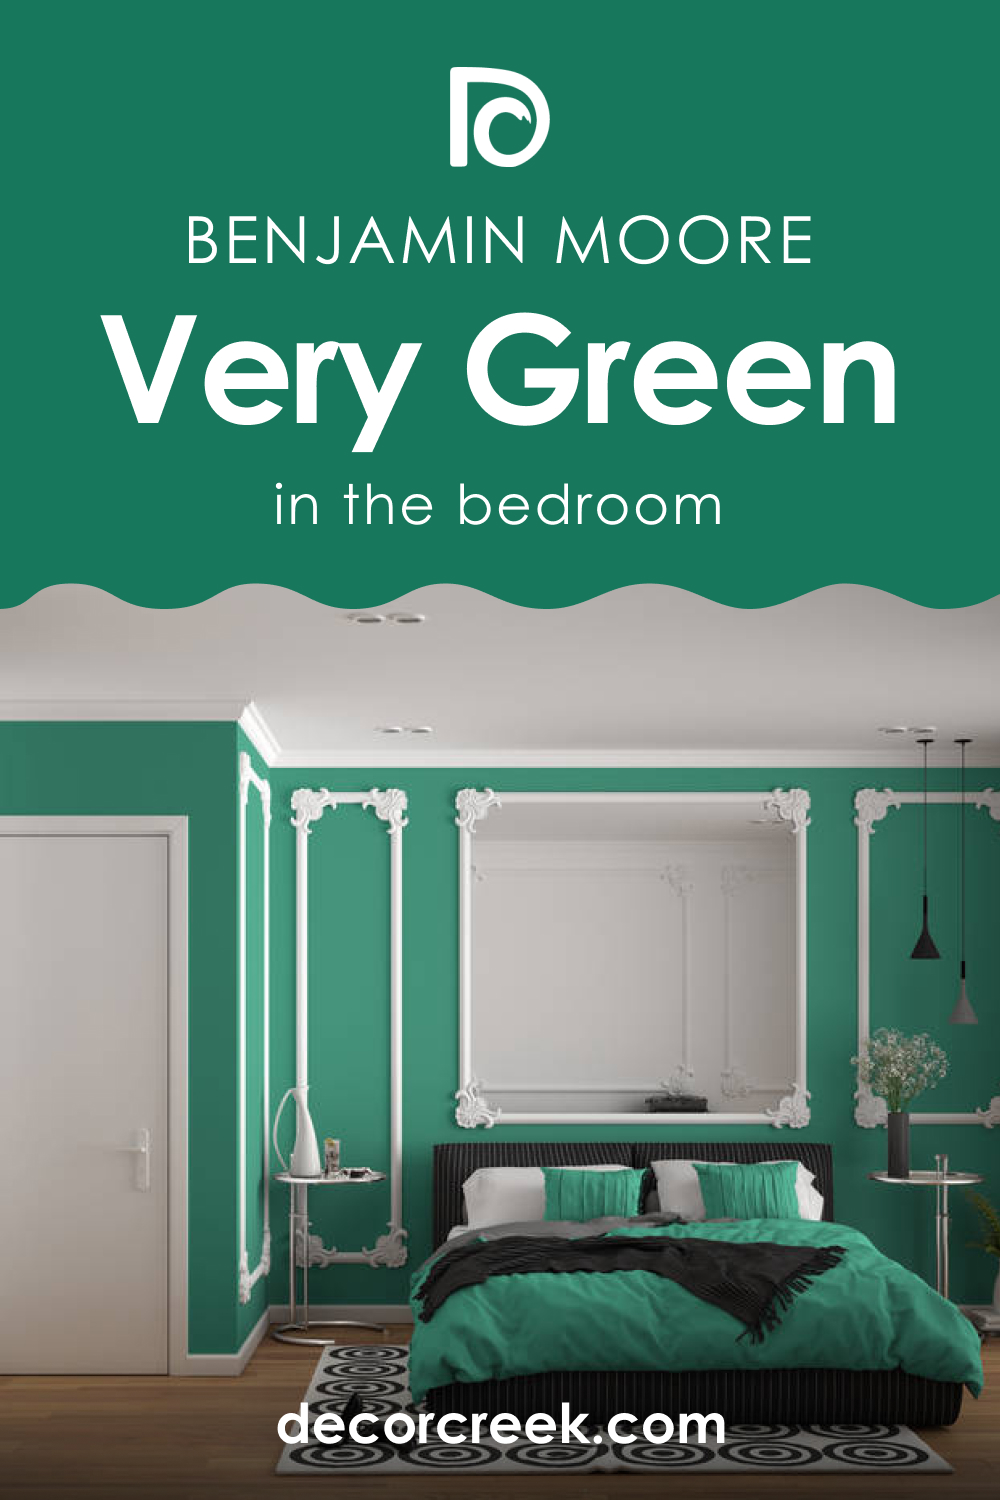 How to Use Very Green 2040-30 in the Bedroom?